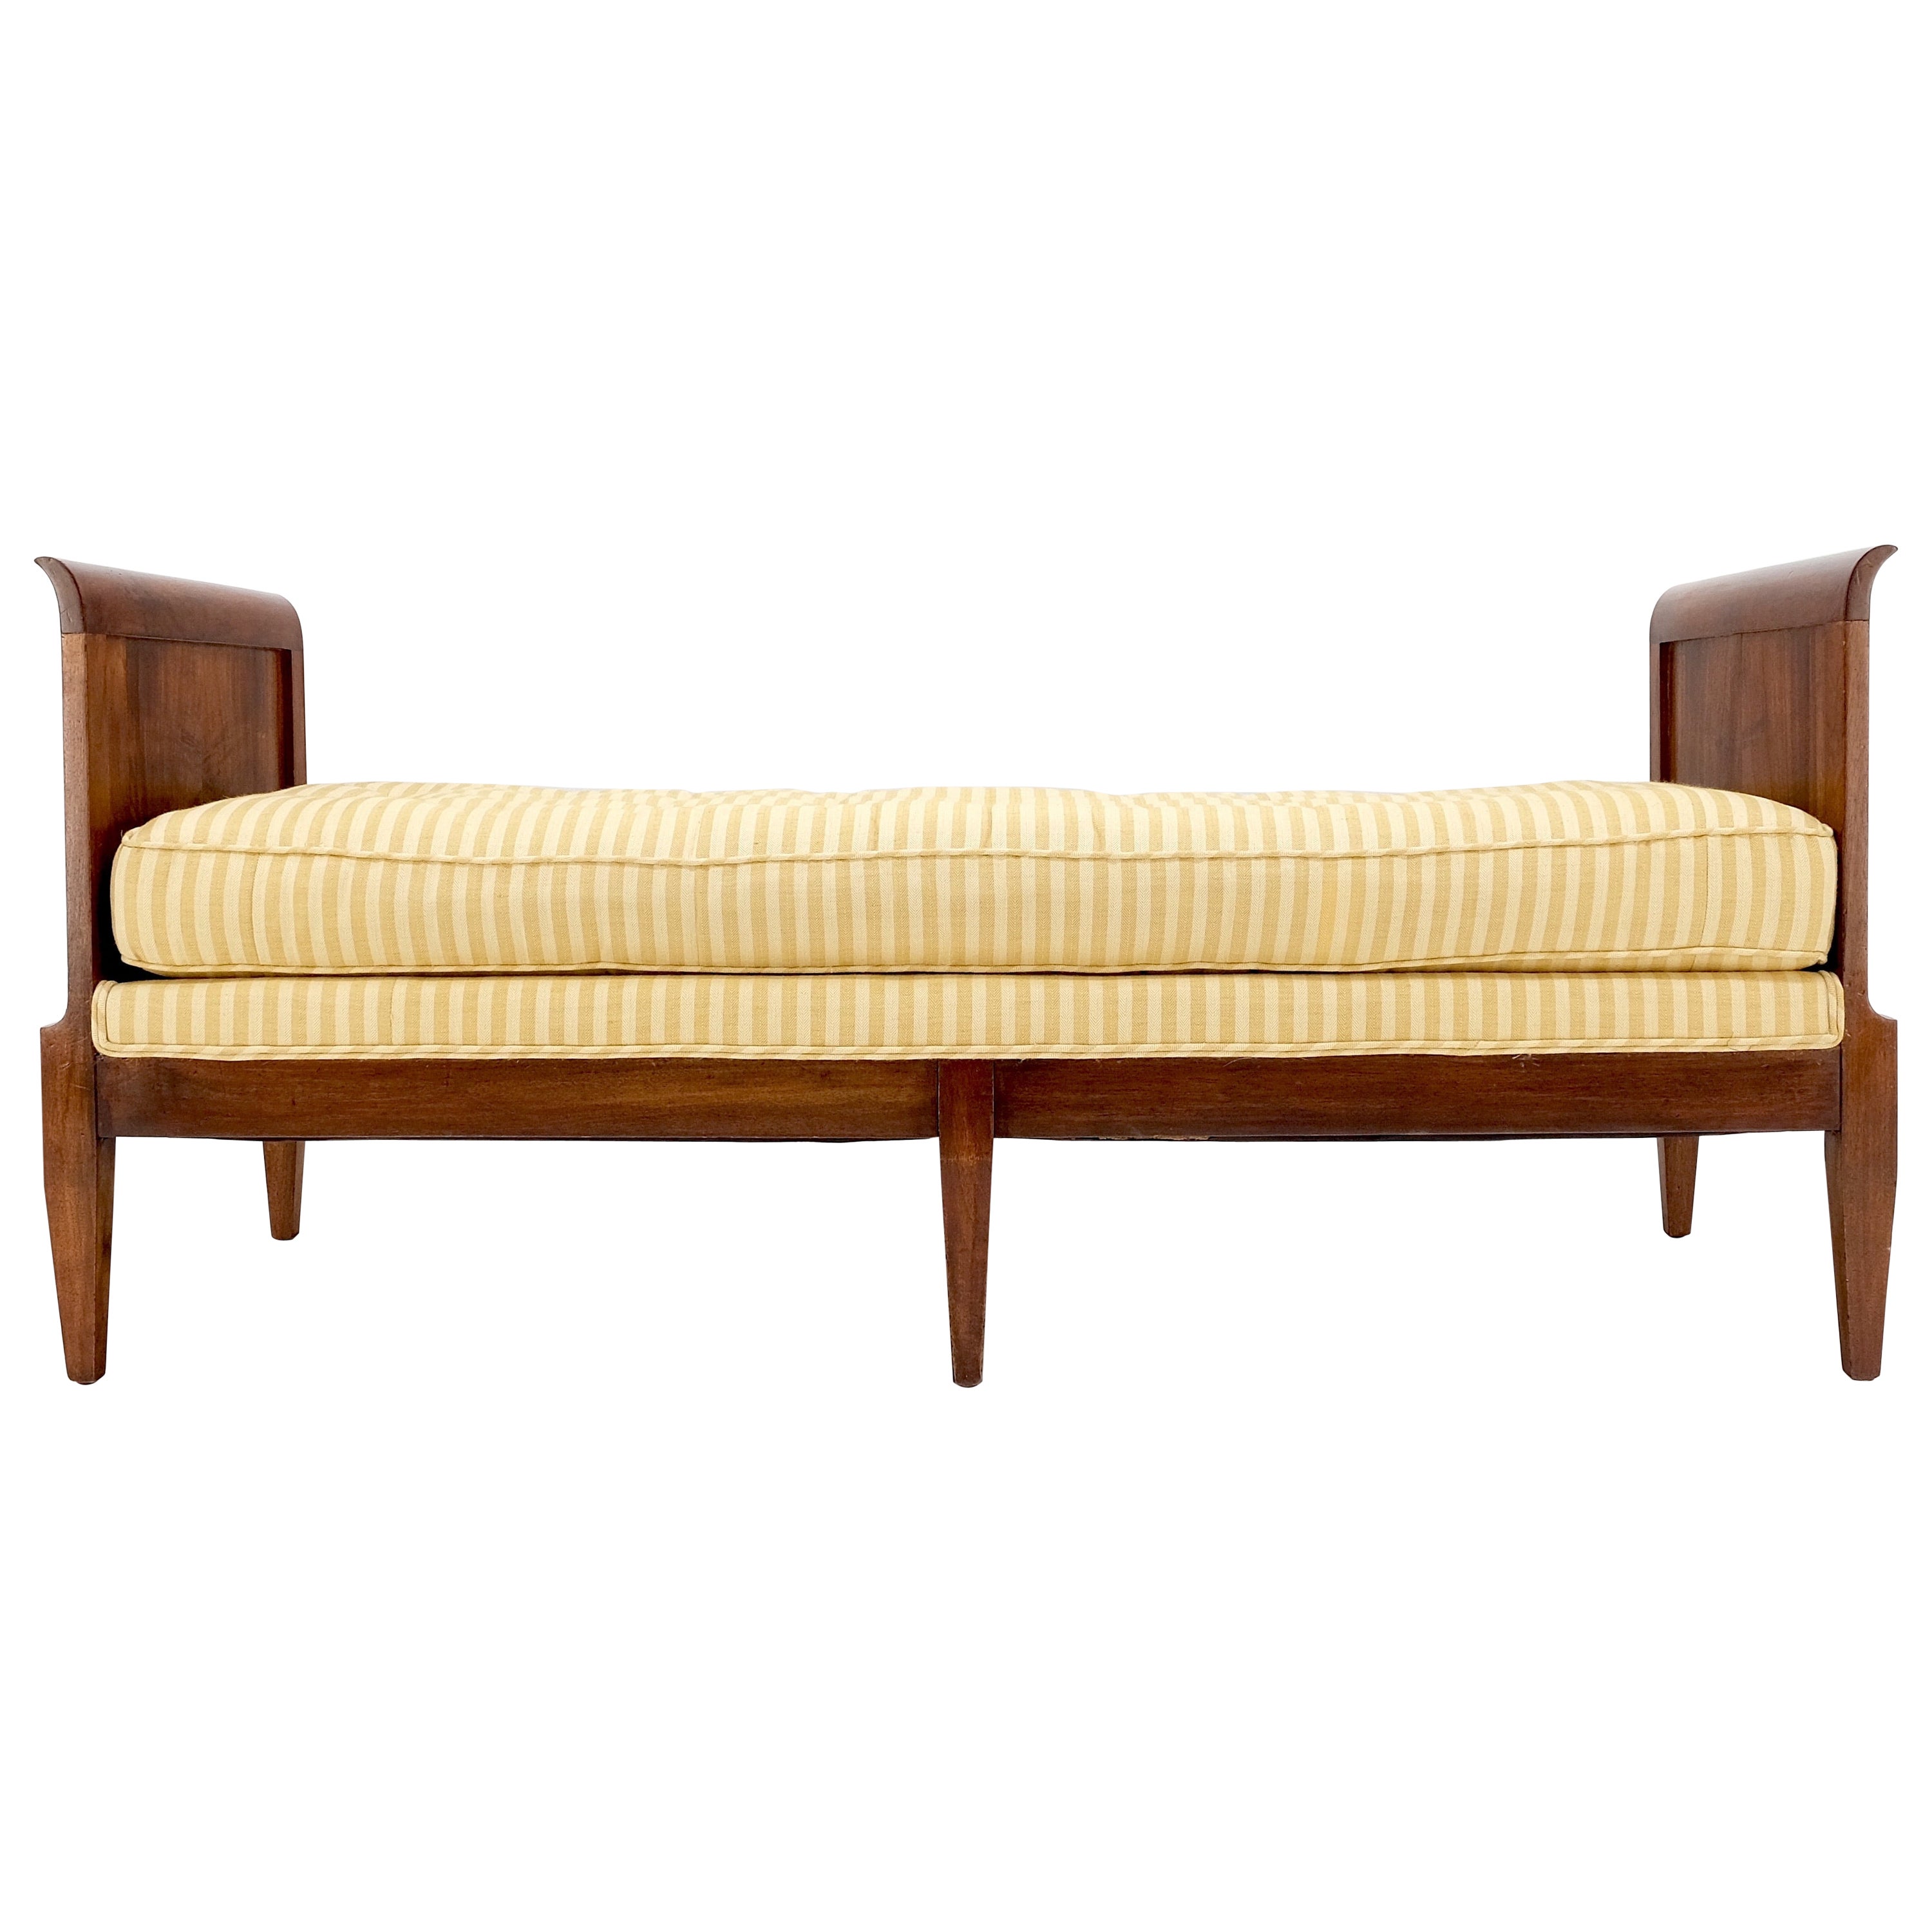 Mahogany Slight Panels Arms Compact Daybed Style Gold Stripe Window Bench MINT! For Sale